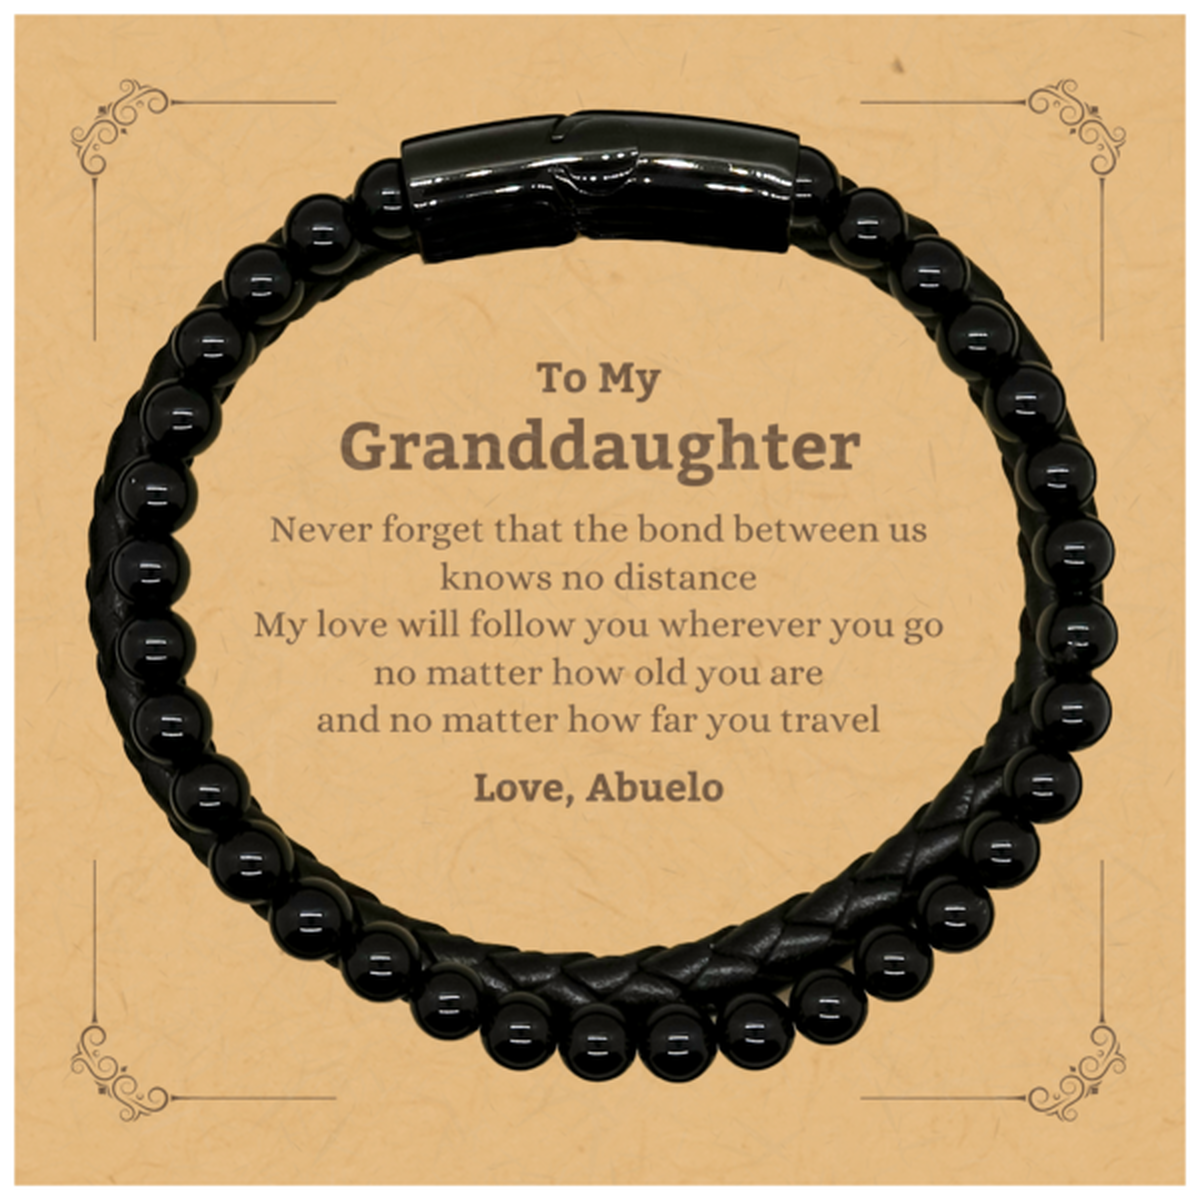 Granddaughter Birthday Gifts from Abuelo, Adjustable Stone Leather Bracelets for Granddaughter Christmas Graduation Unique Gifts Granddaughter Never forget that the bond between us knows no distance. Love, Abuelo